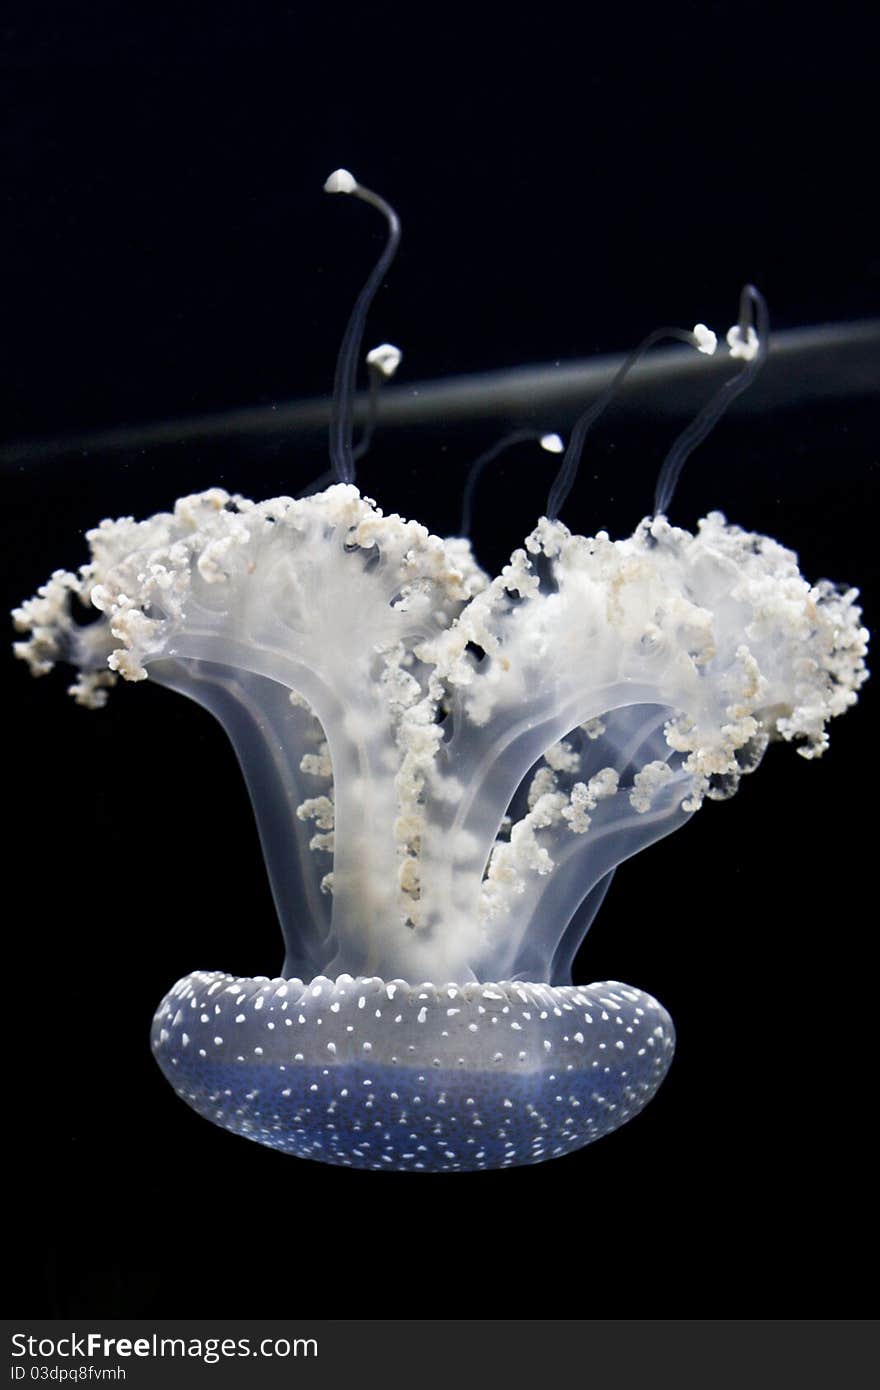 A clean and white jellyfish floating upside down in an aquarium tank at the Houston Zoo. A clean and white jellyfish floating upside down in an aquarium tank at the Houston Zoo